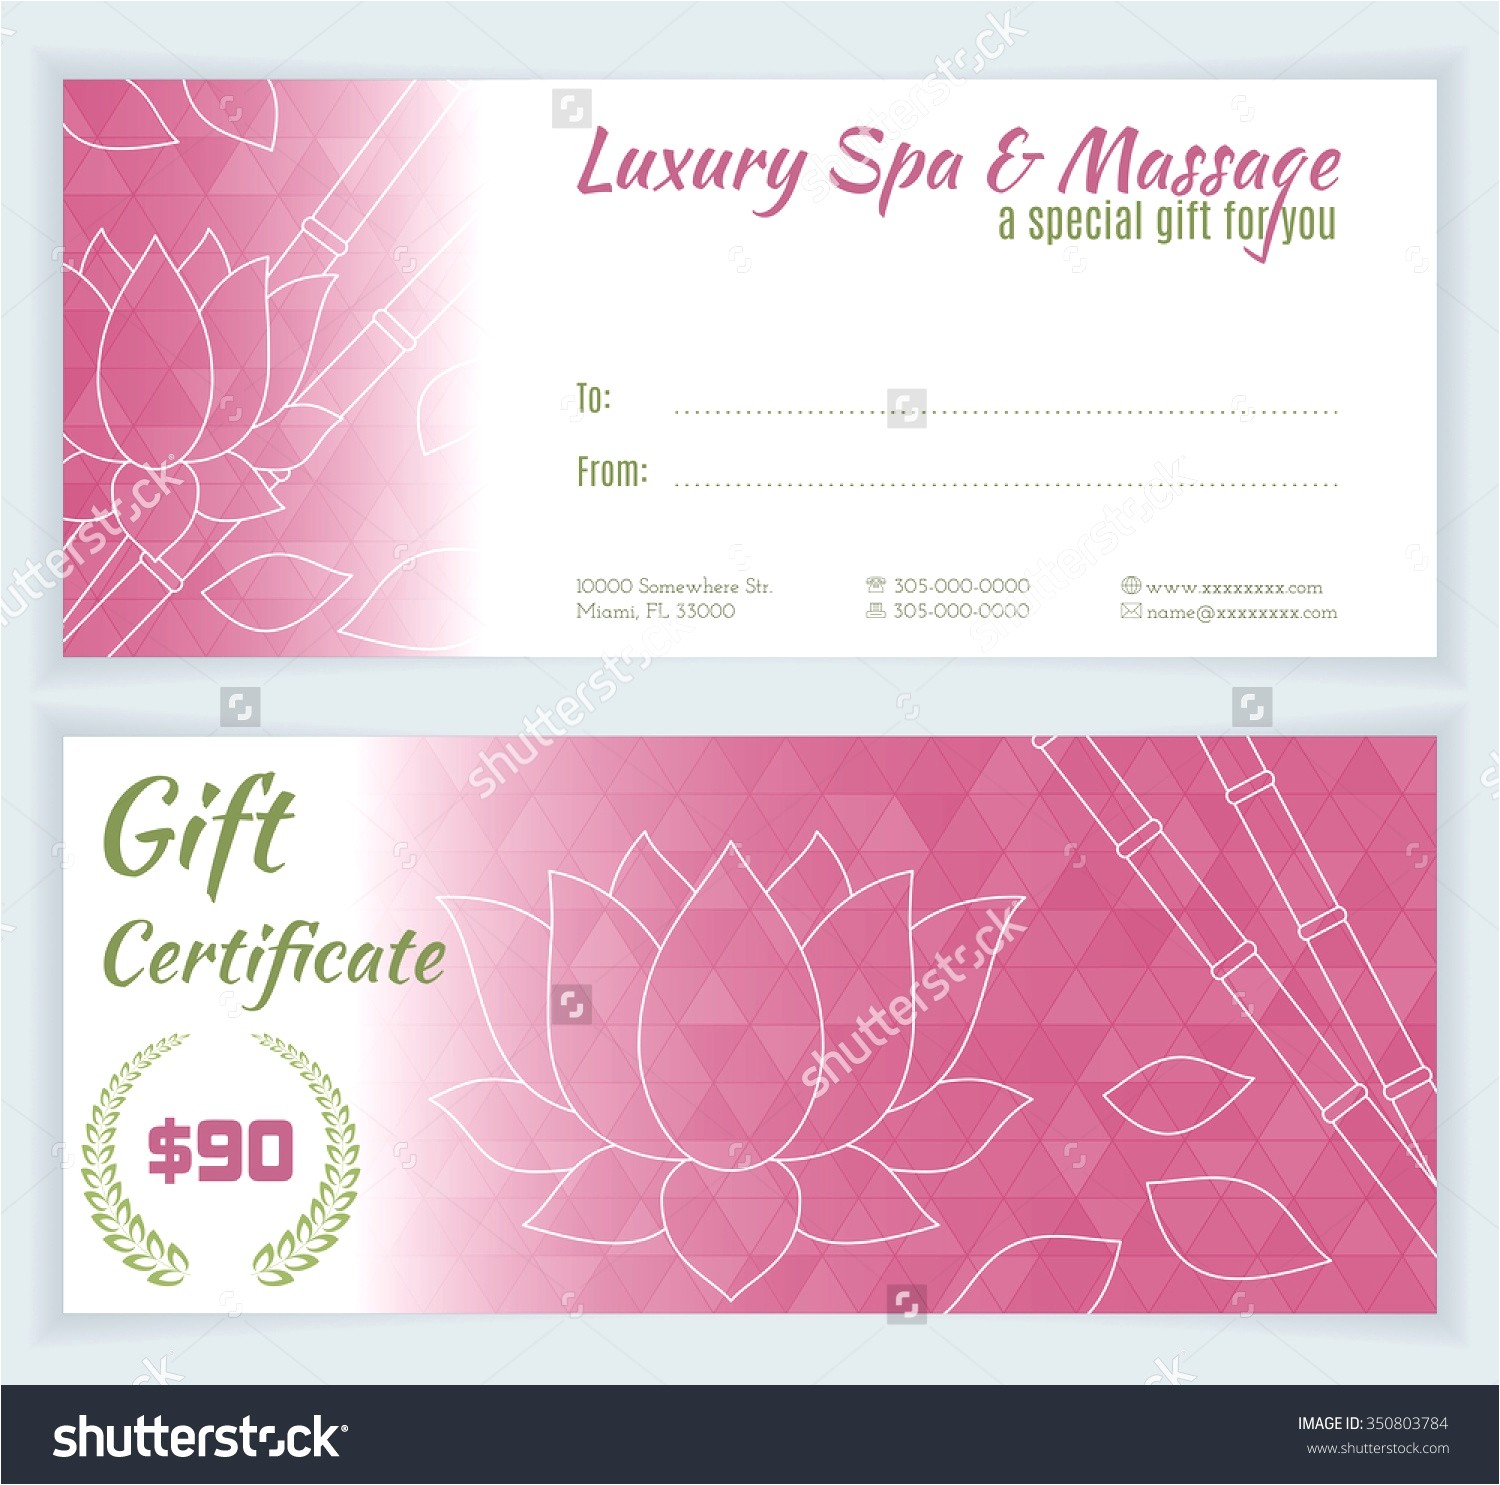 free magazine subscription gift certificate template